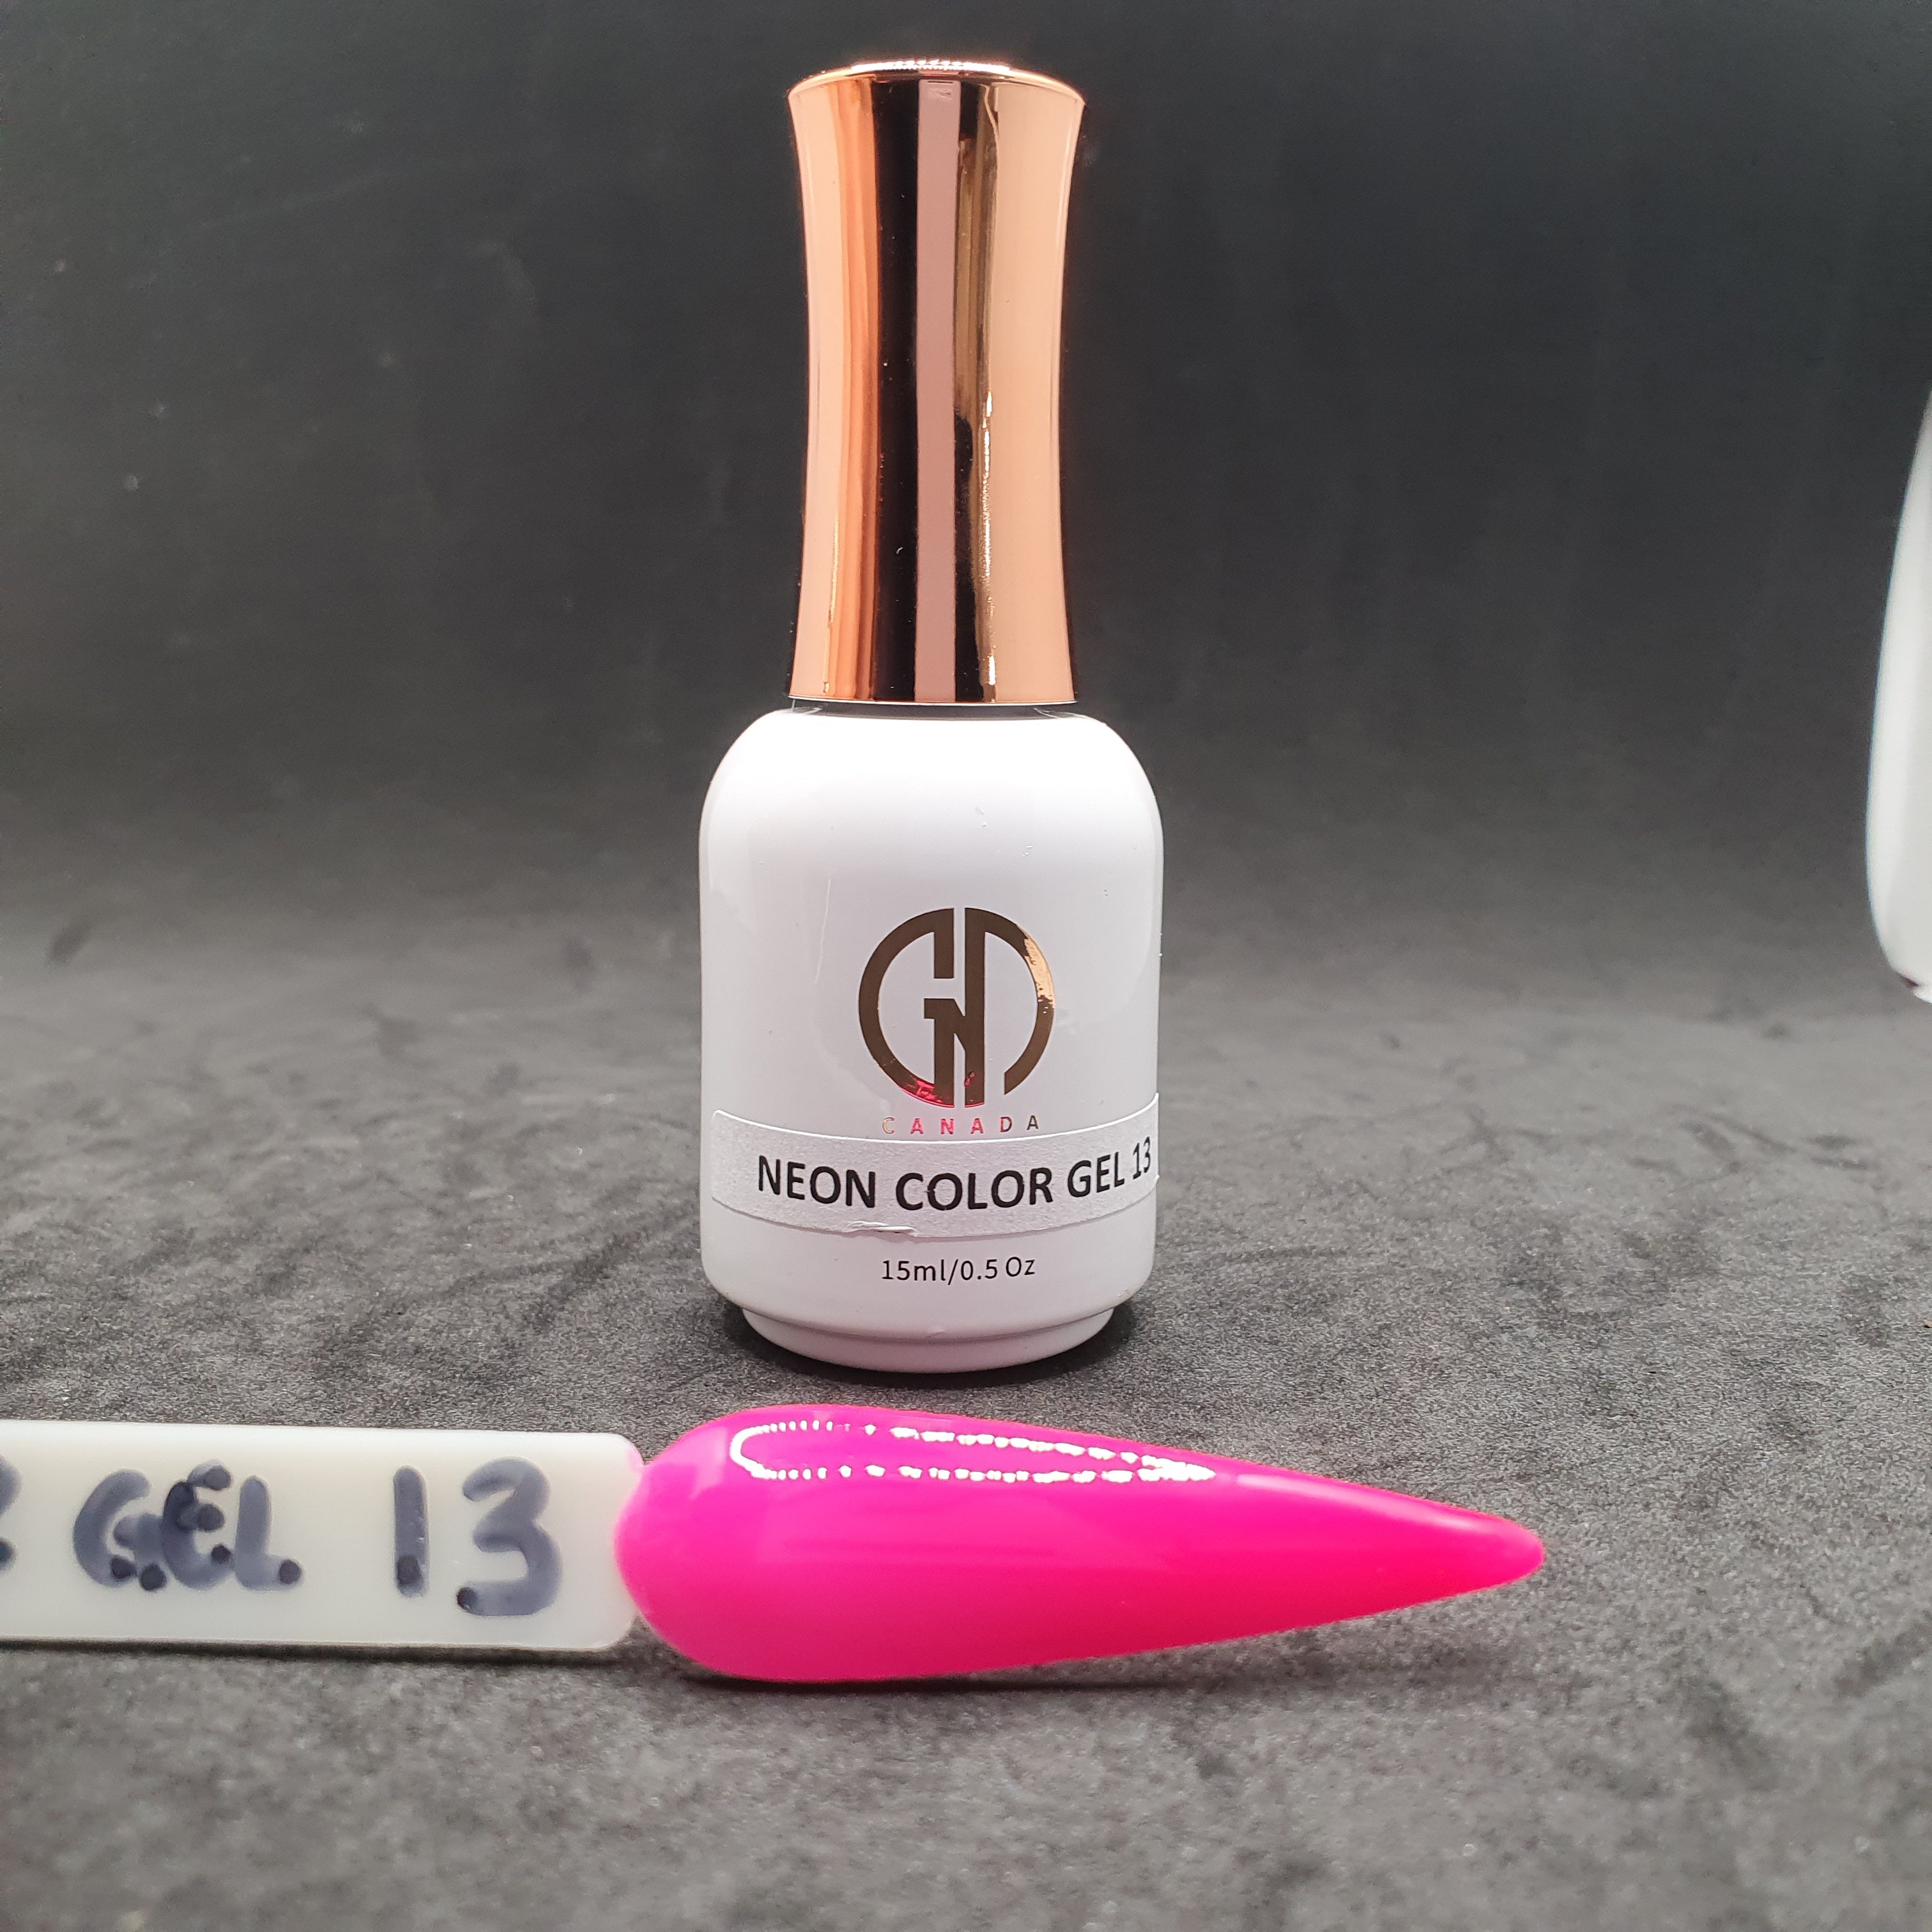 NEW - GND NEON GEL COLOR - 13